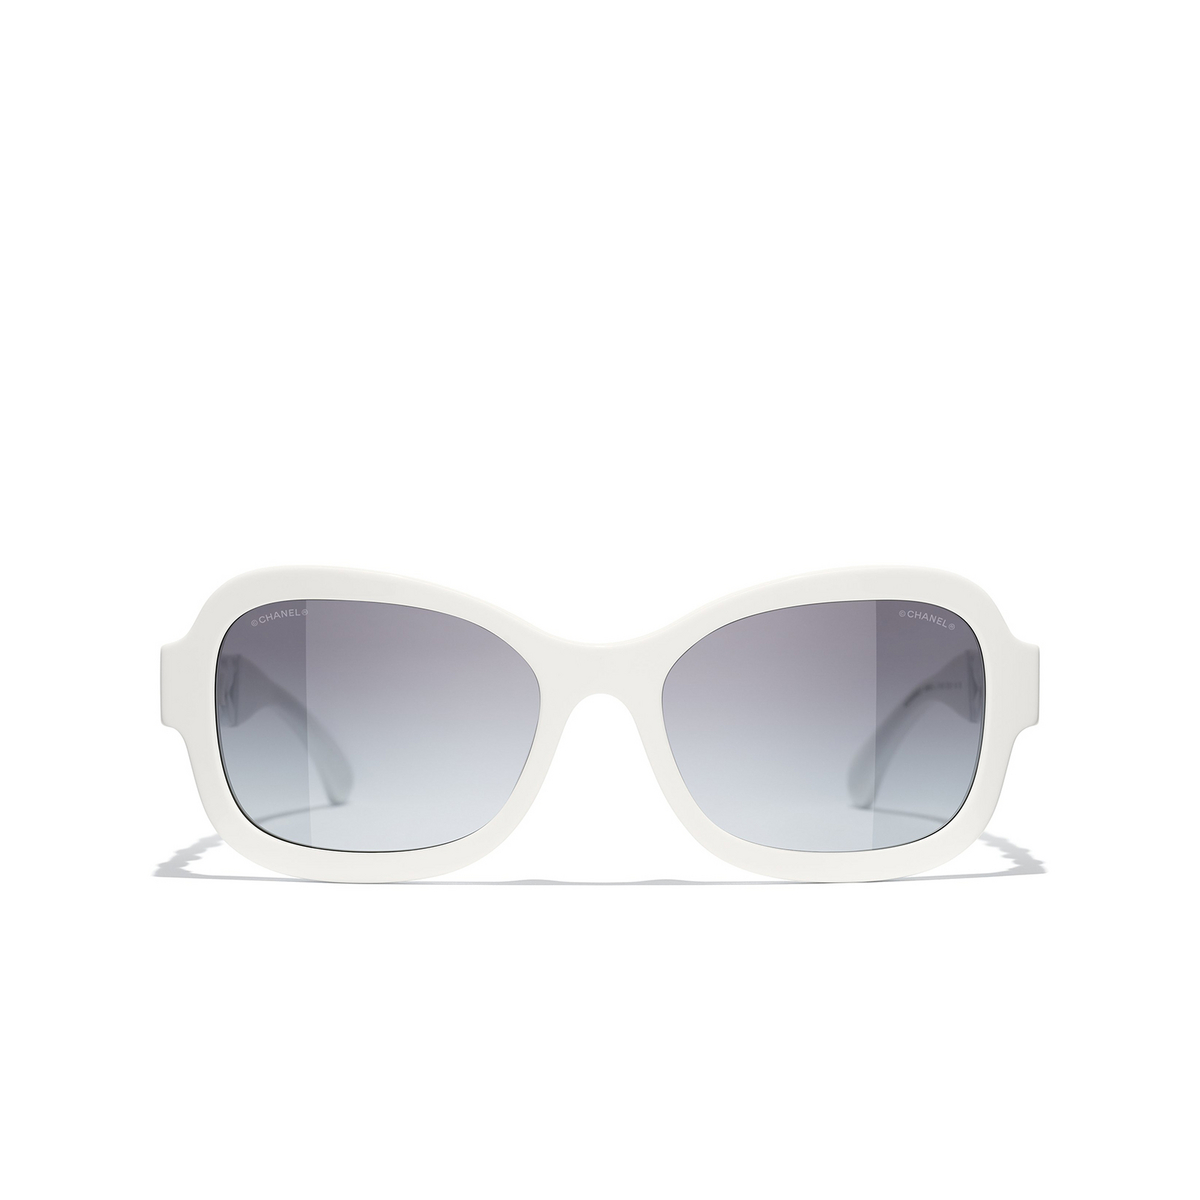 CHANEL rectangle Sunglasses C716S6 White - front view